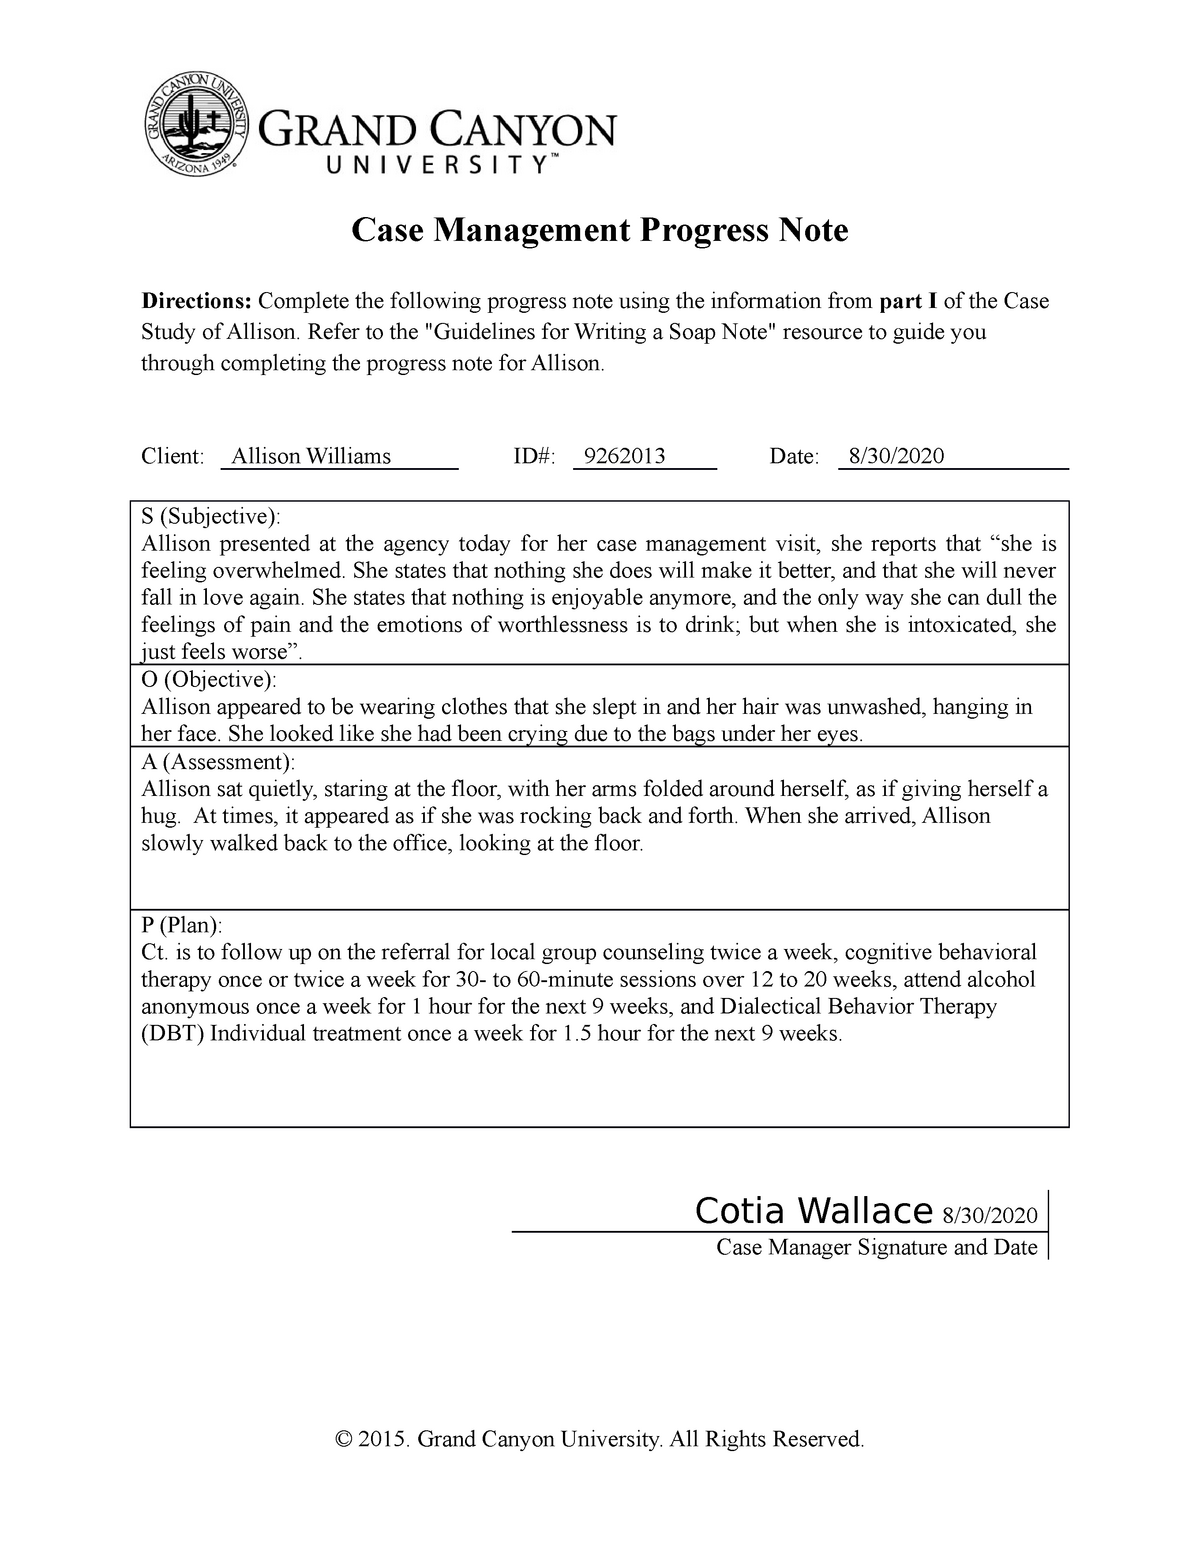 Case Management Note Template 5052